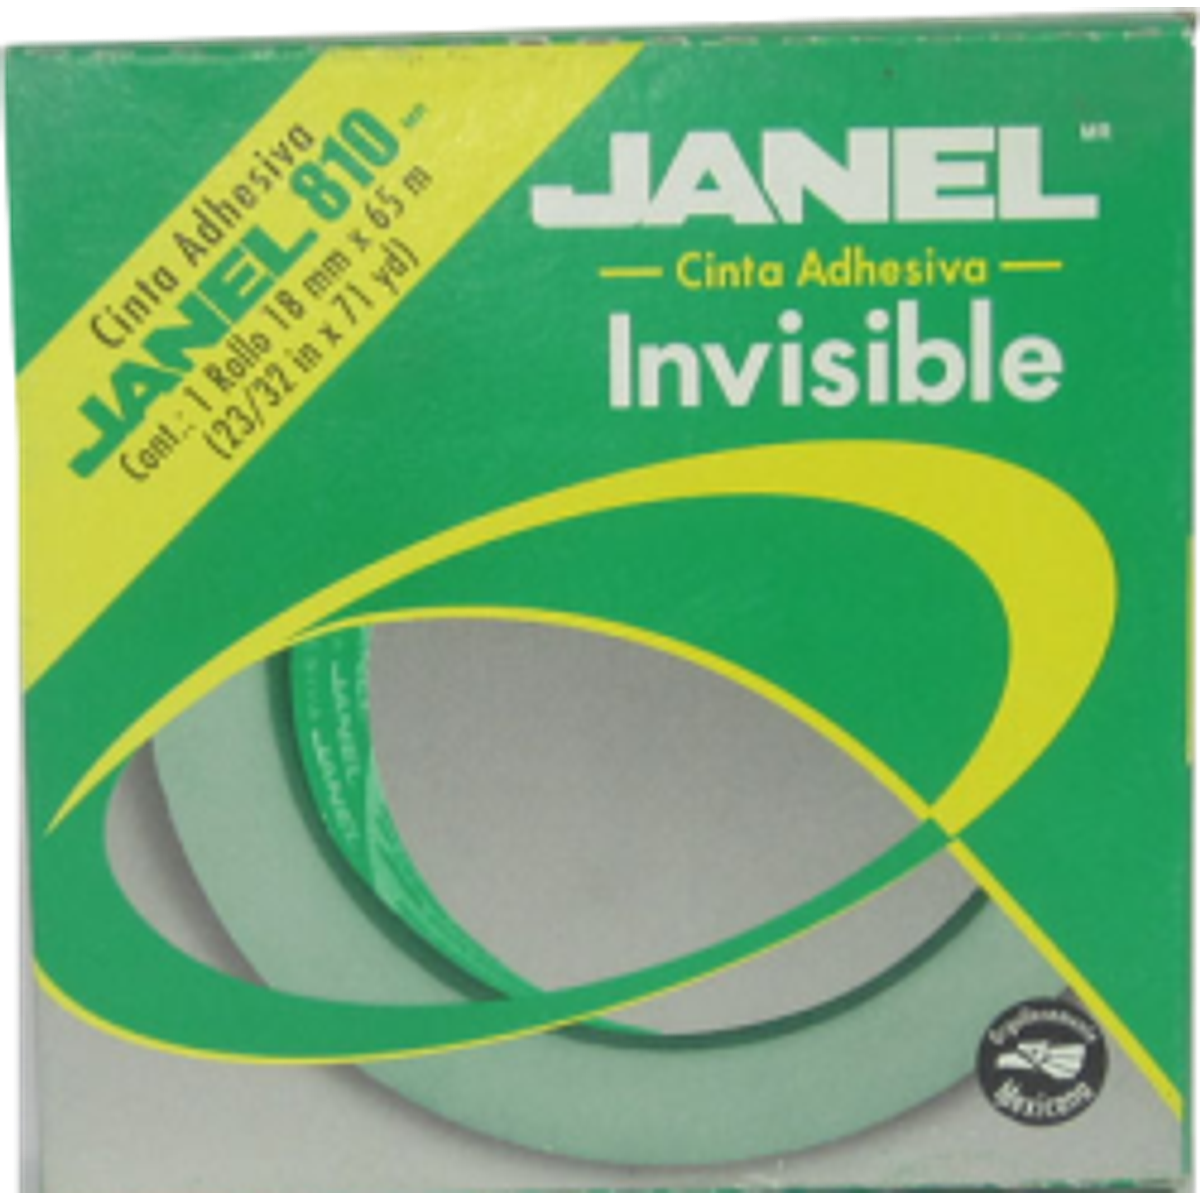 Cinta invisible 810 18 mm x 65m janel